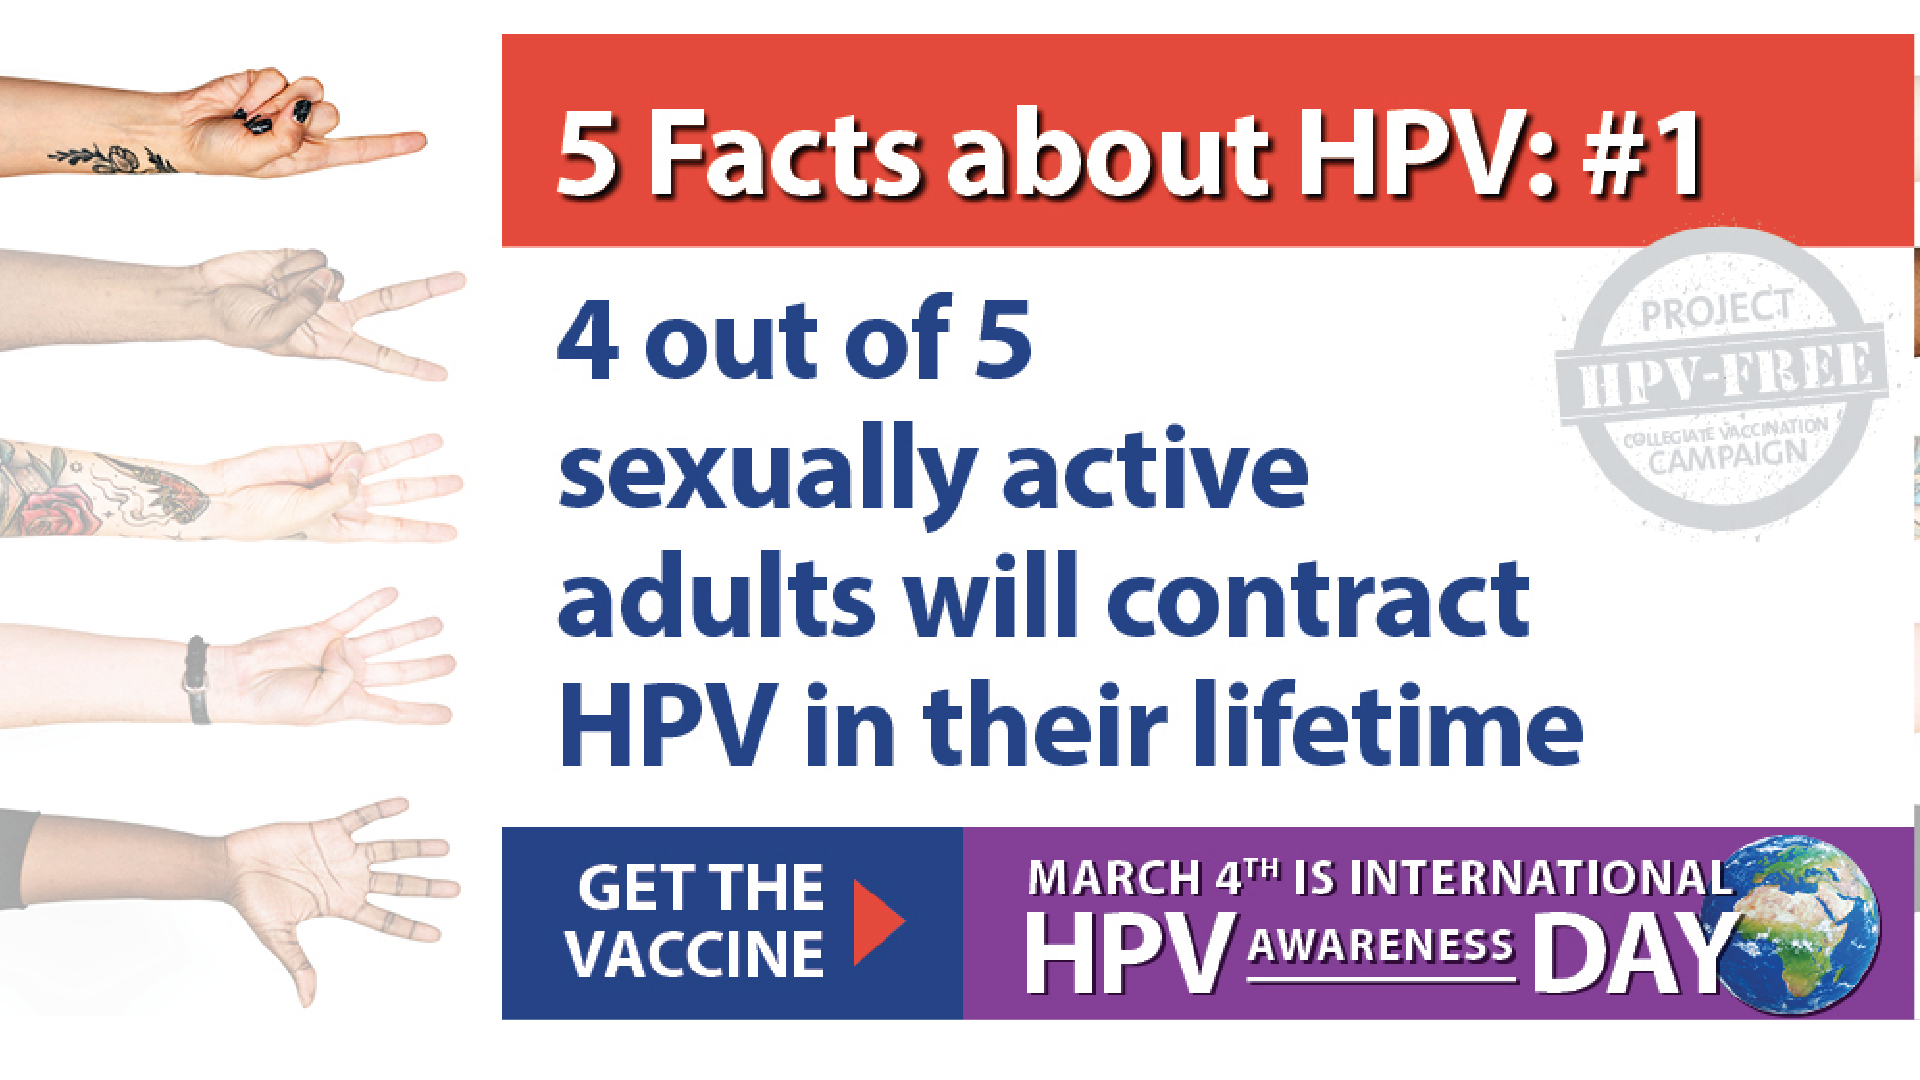 5 facts about HPV